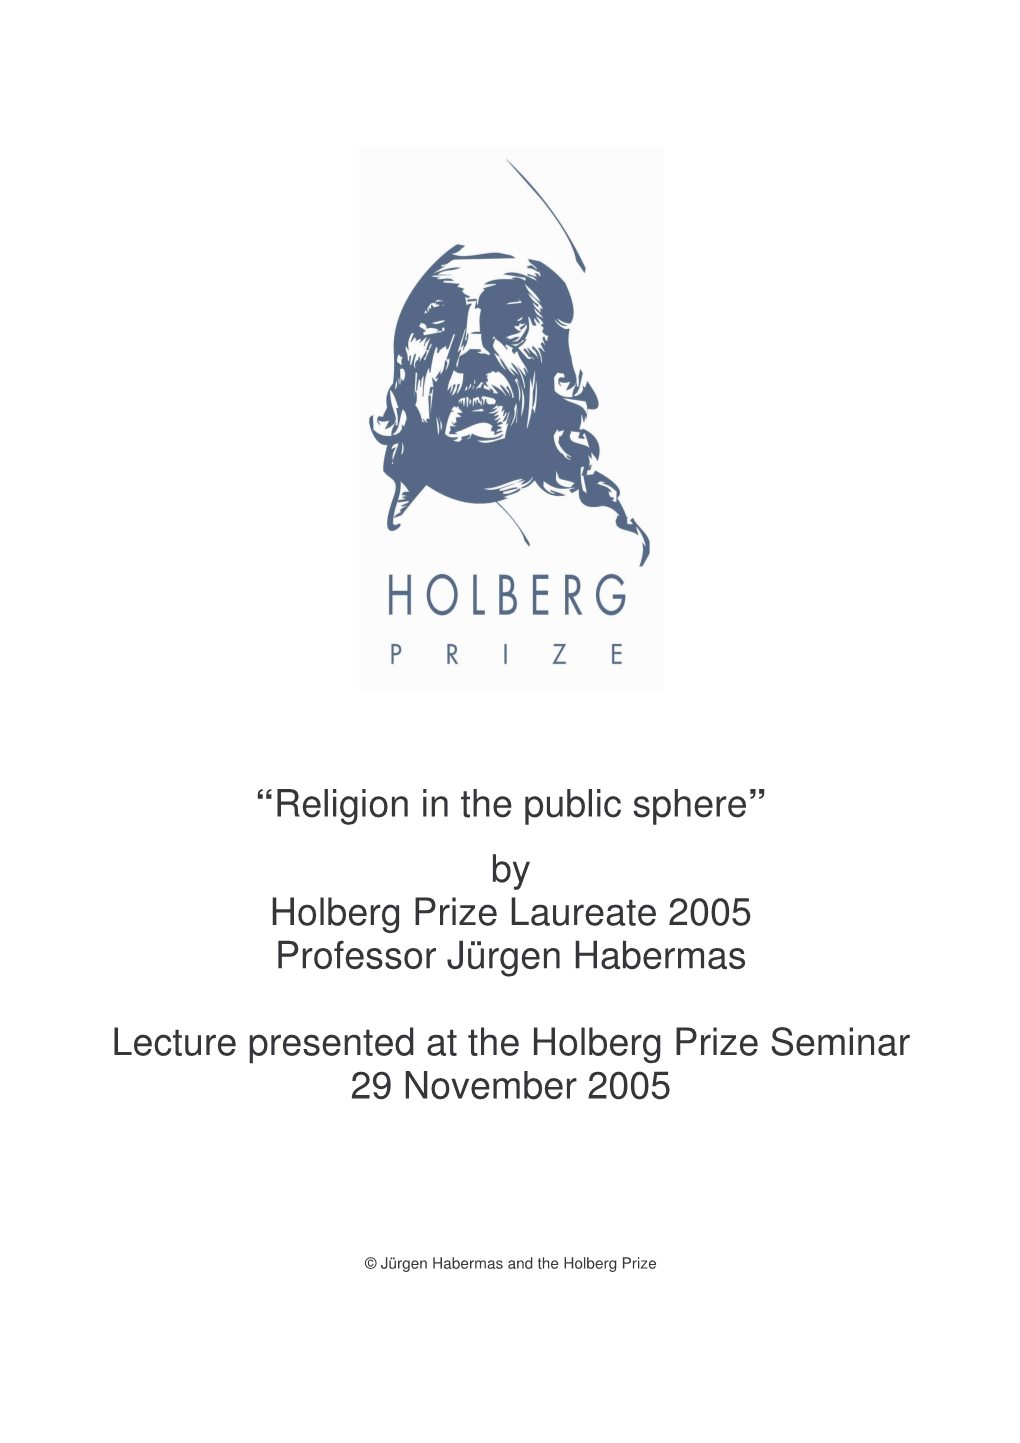 The Holberg Lecture 2005: "Religion in the Public Sphere"